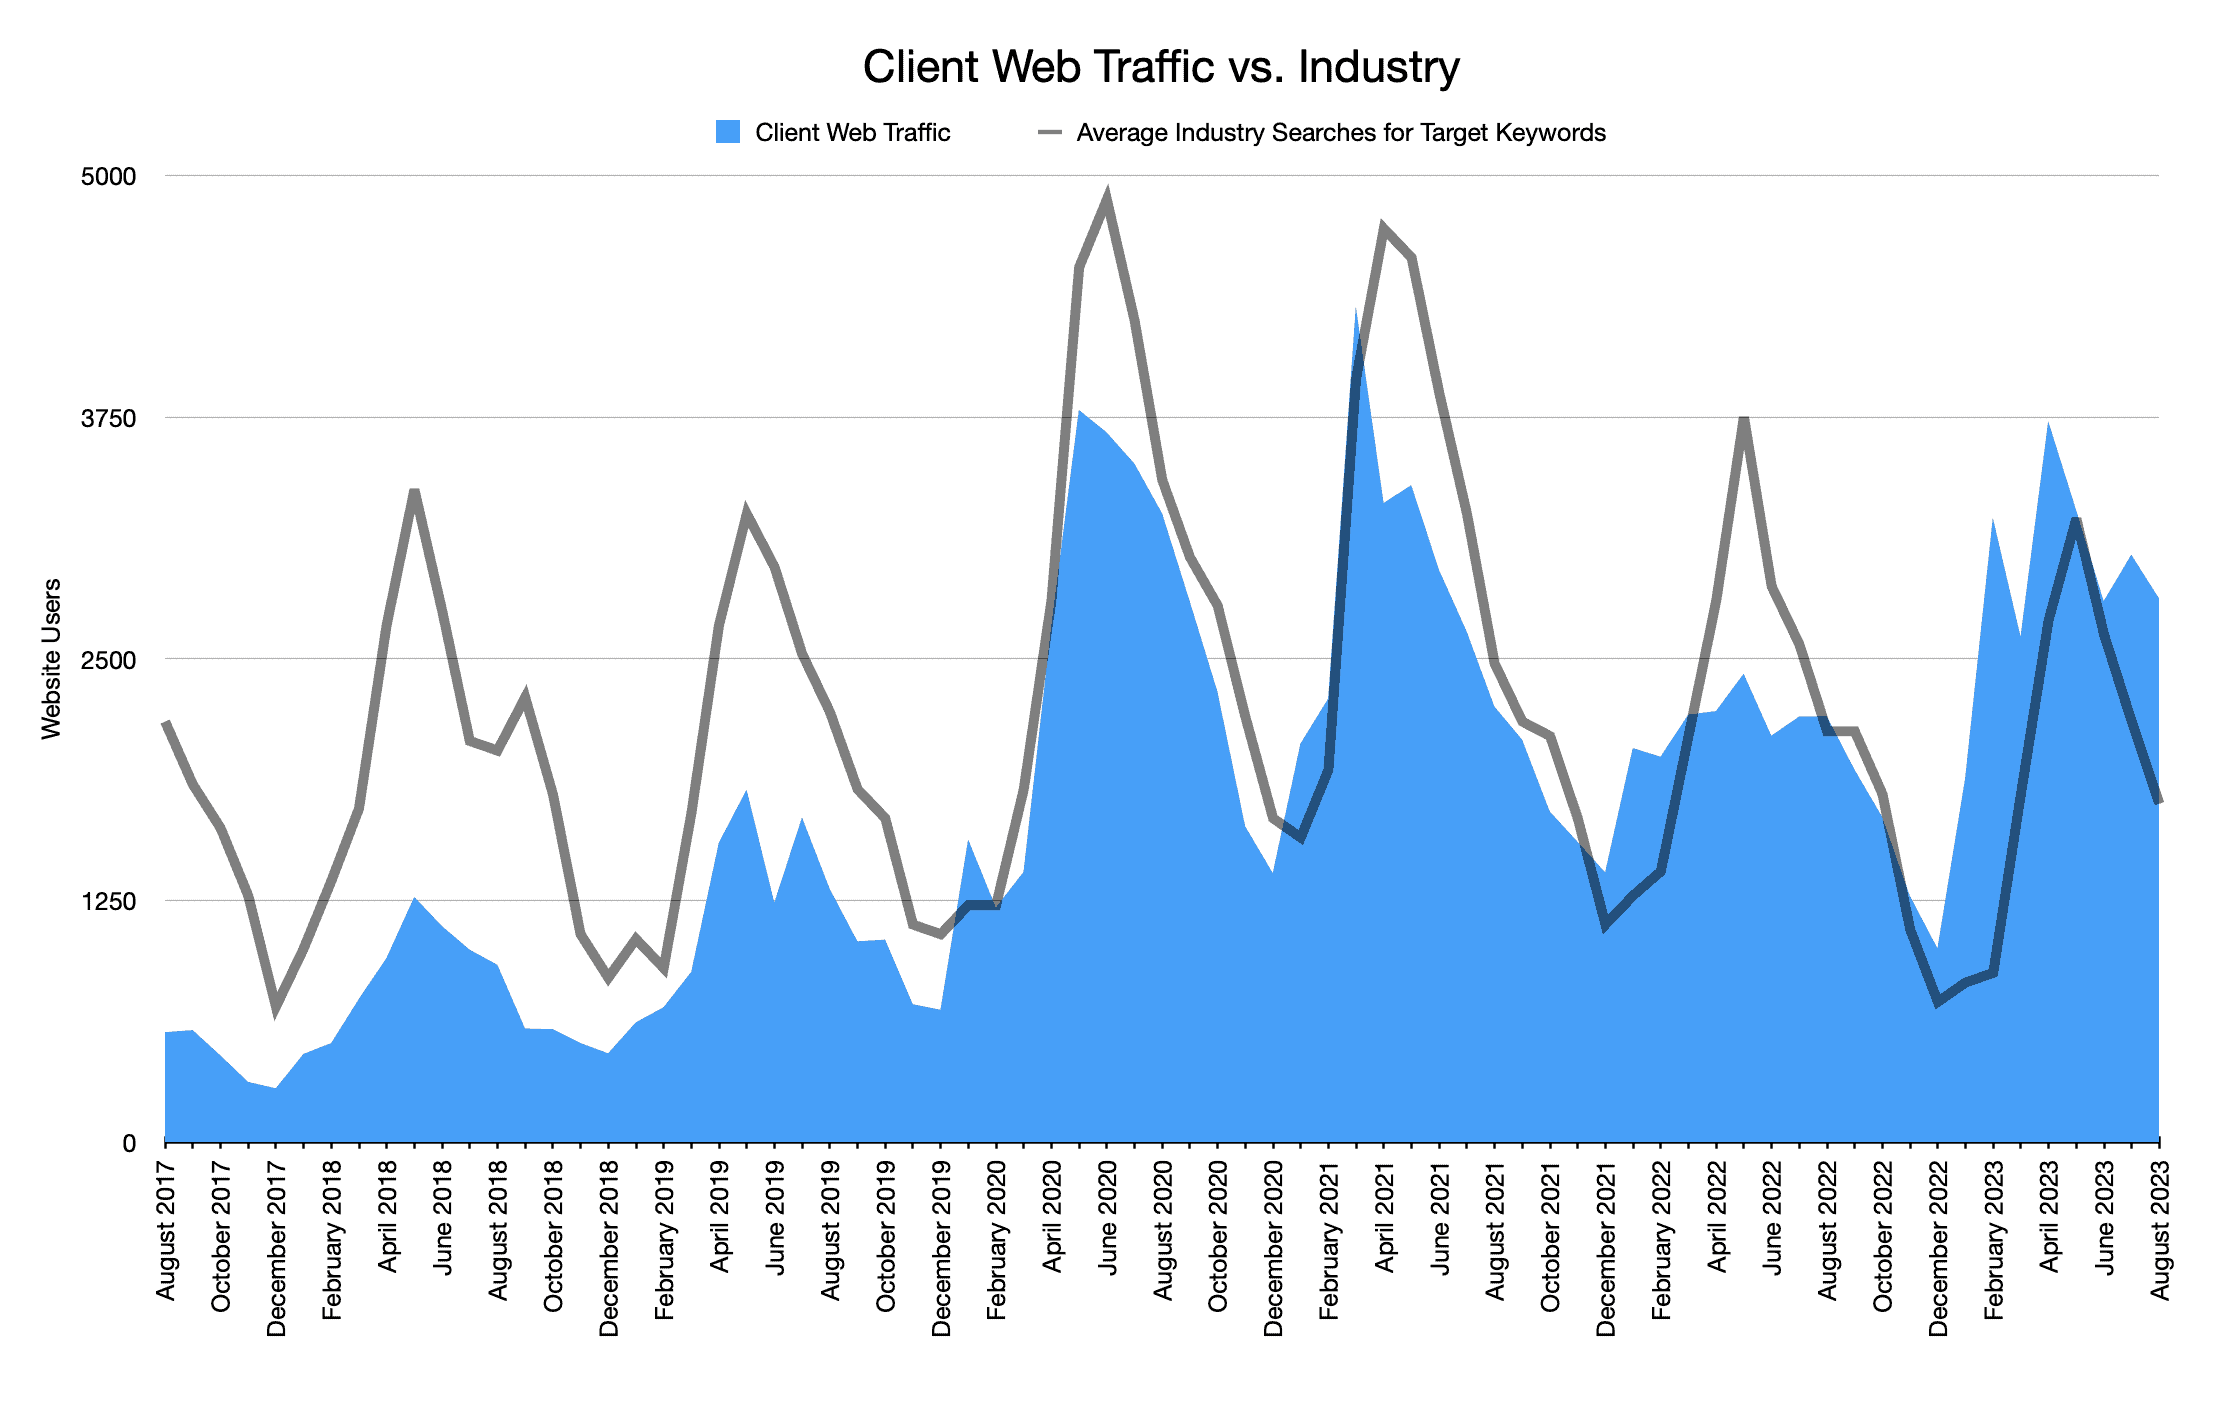 Client Web Traffic vs Industry - Chart over time